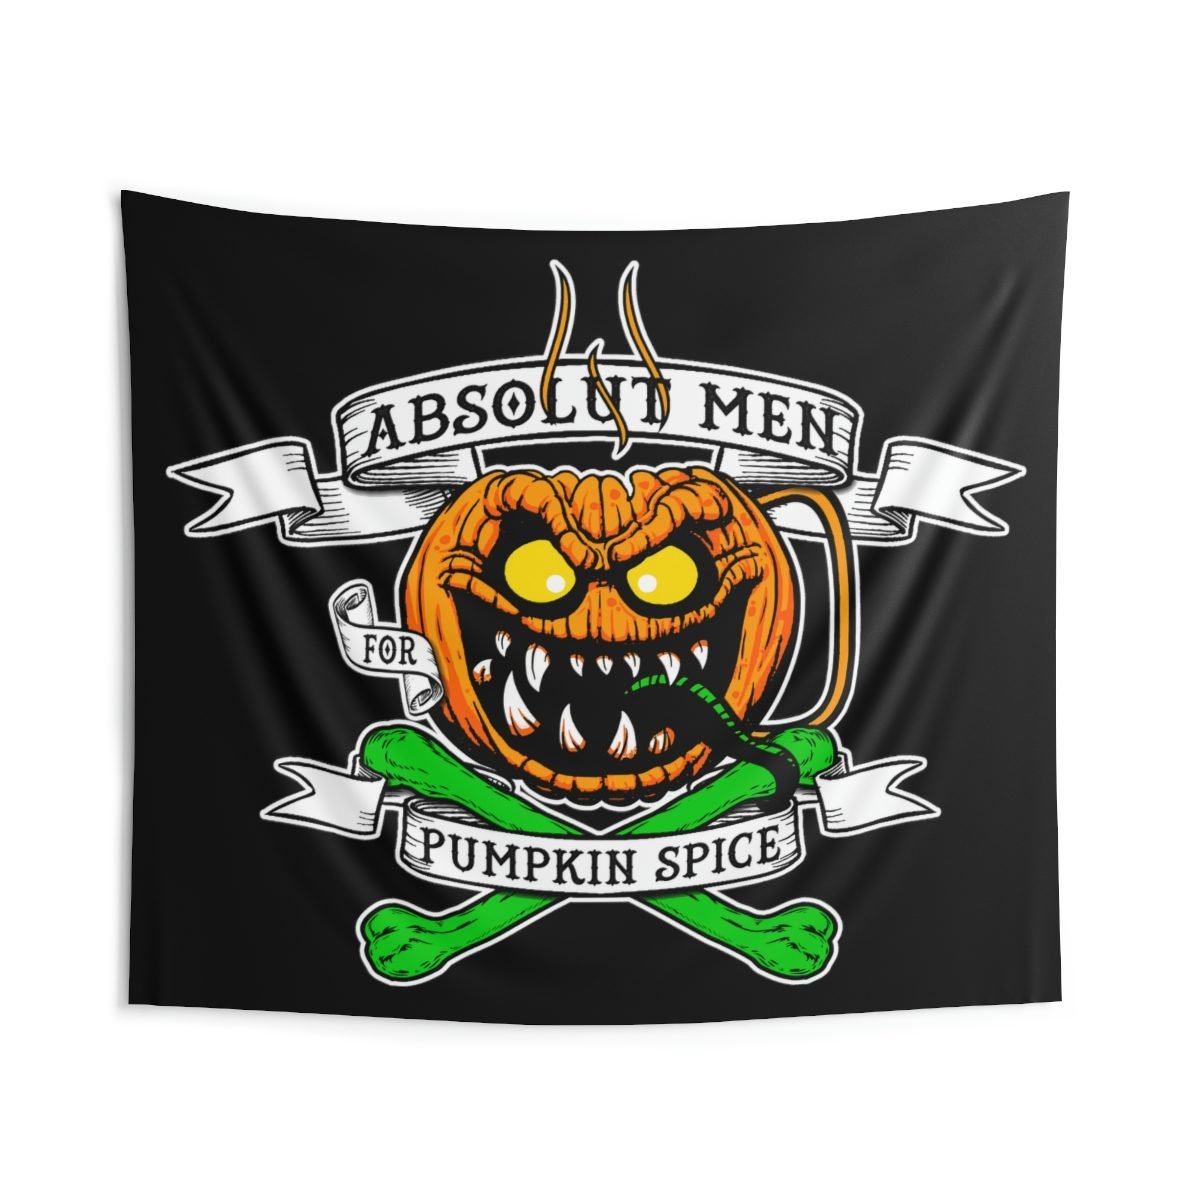 AMPS Absolut Men For Pumpkin Spice Indoor Wall Tapestries